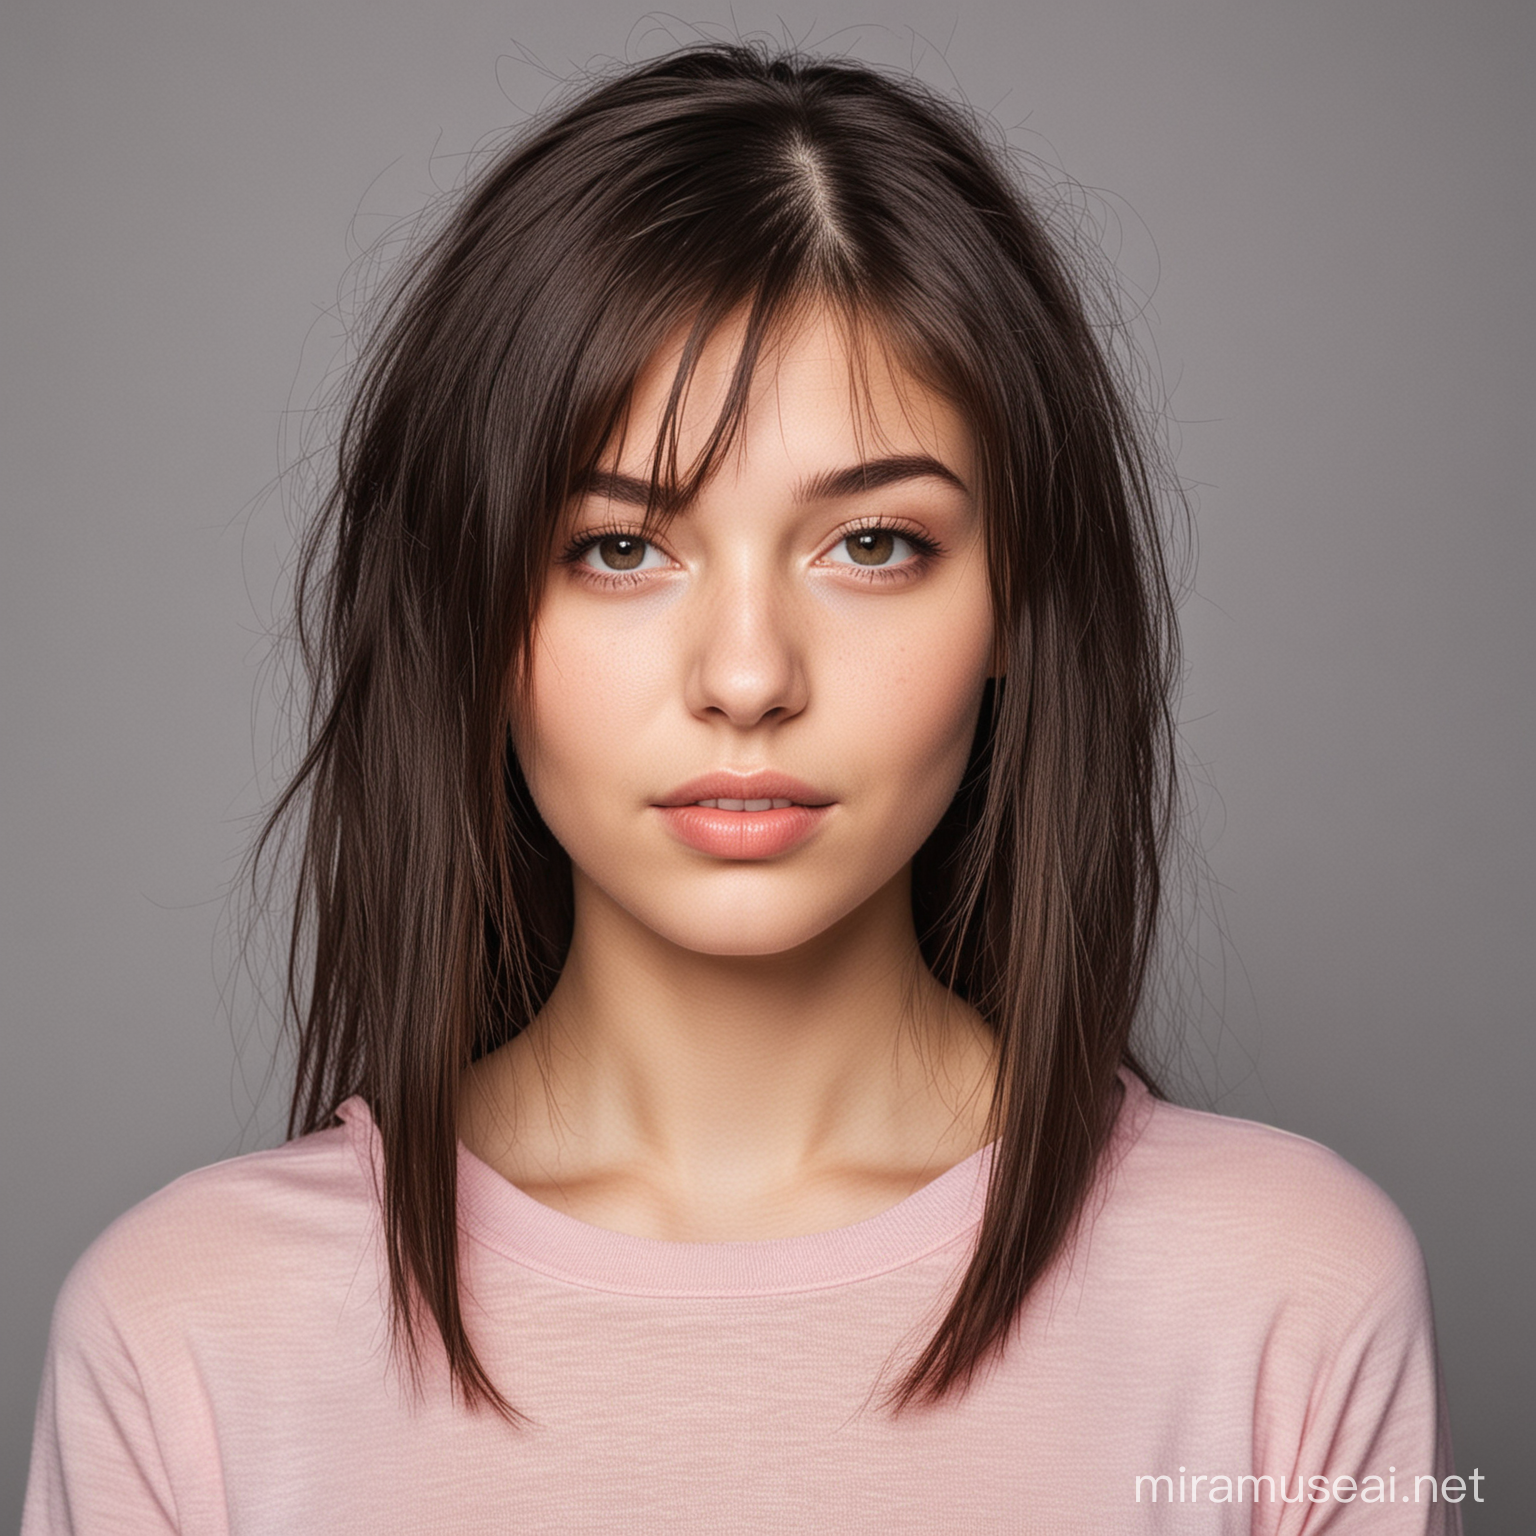 Picture of a girl with split hair